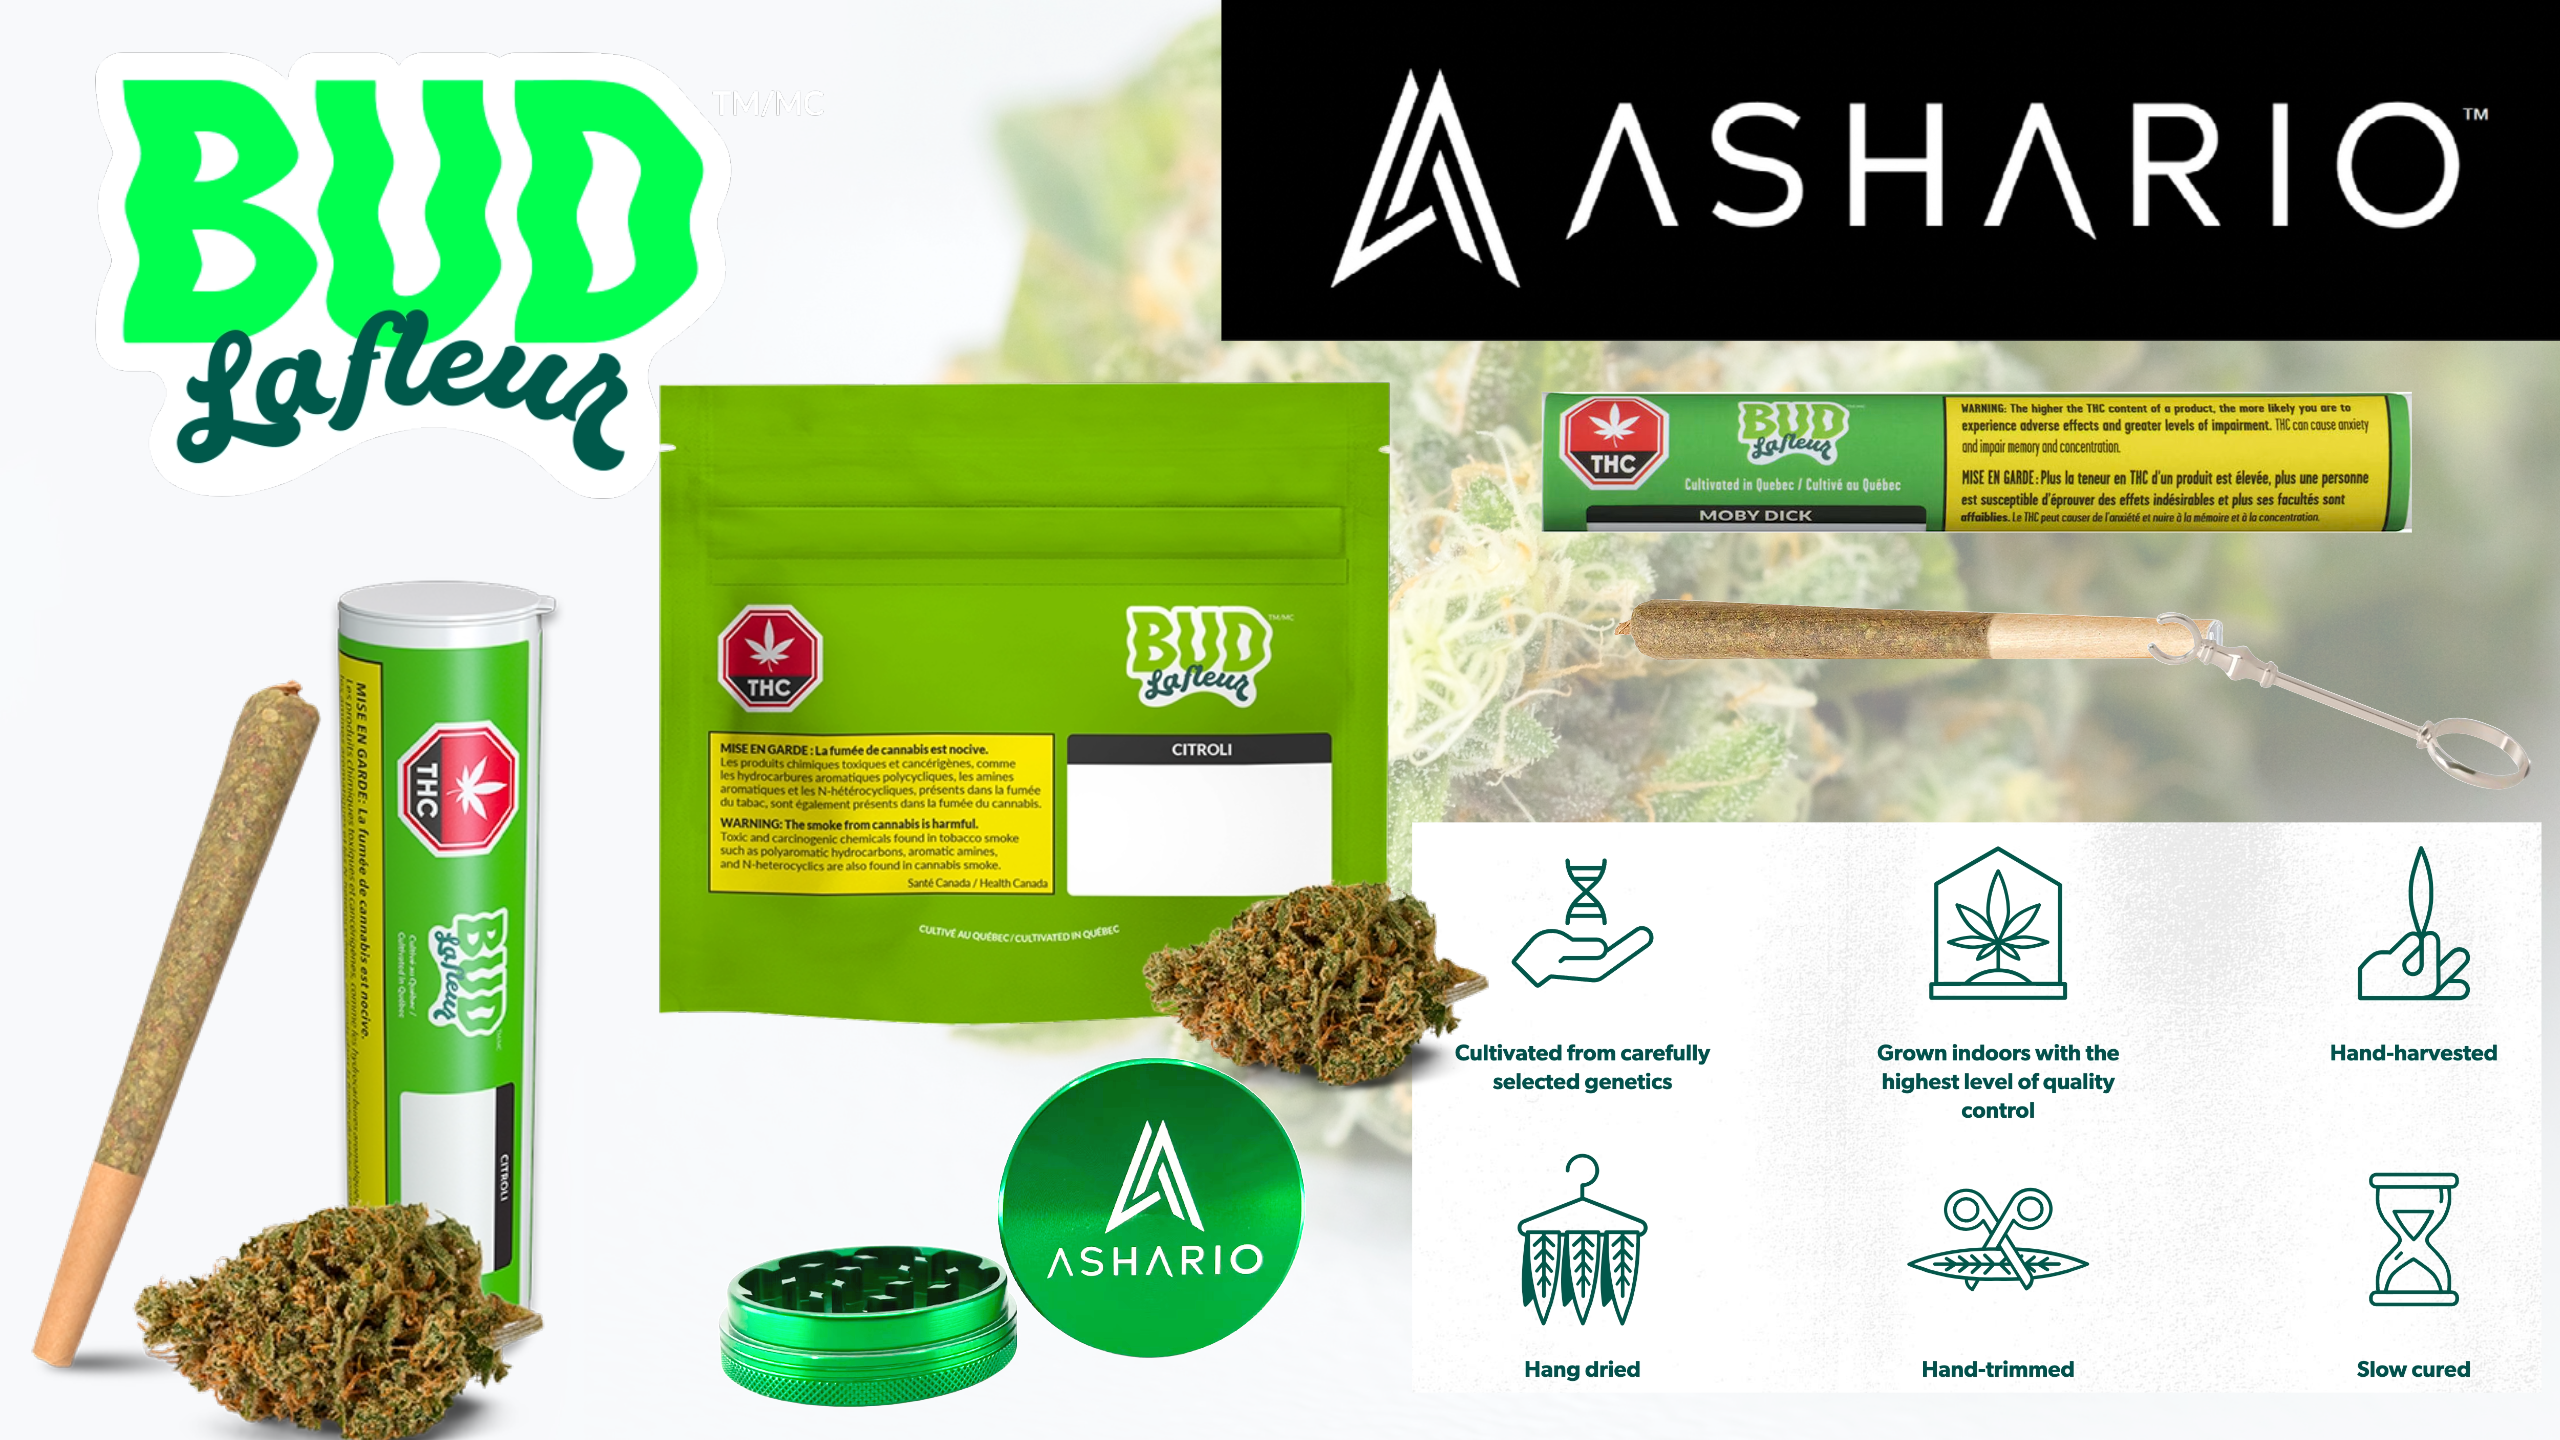 Discover the epitome of cannabis luxury with Bud Lafleur, a premium line of flower and pre-rolls now available at Ashario.